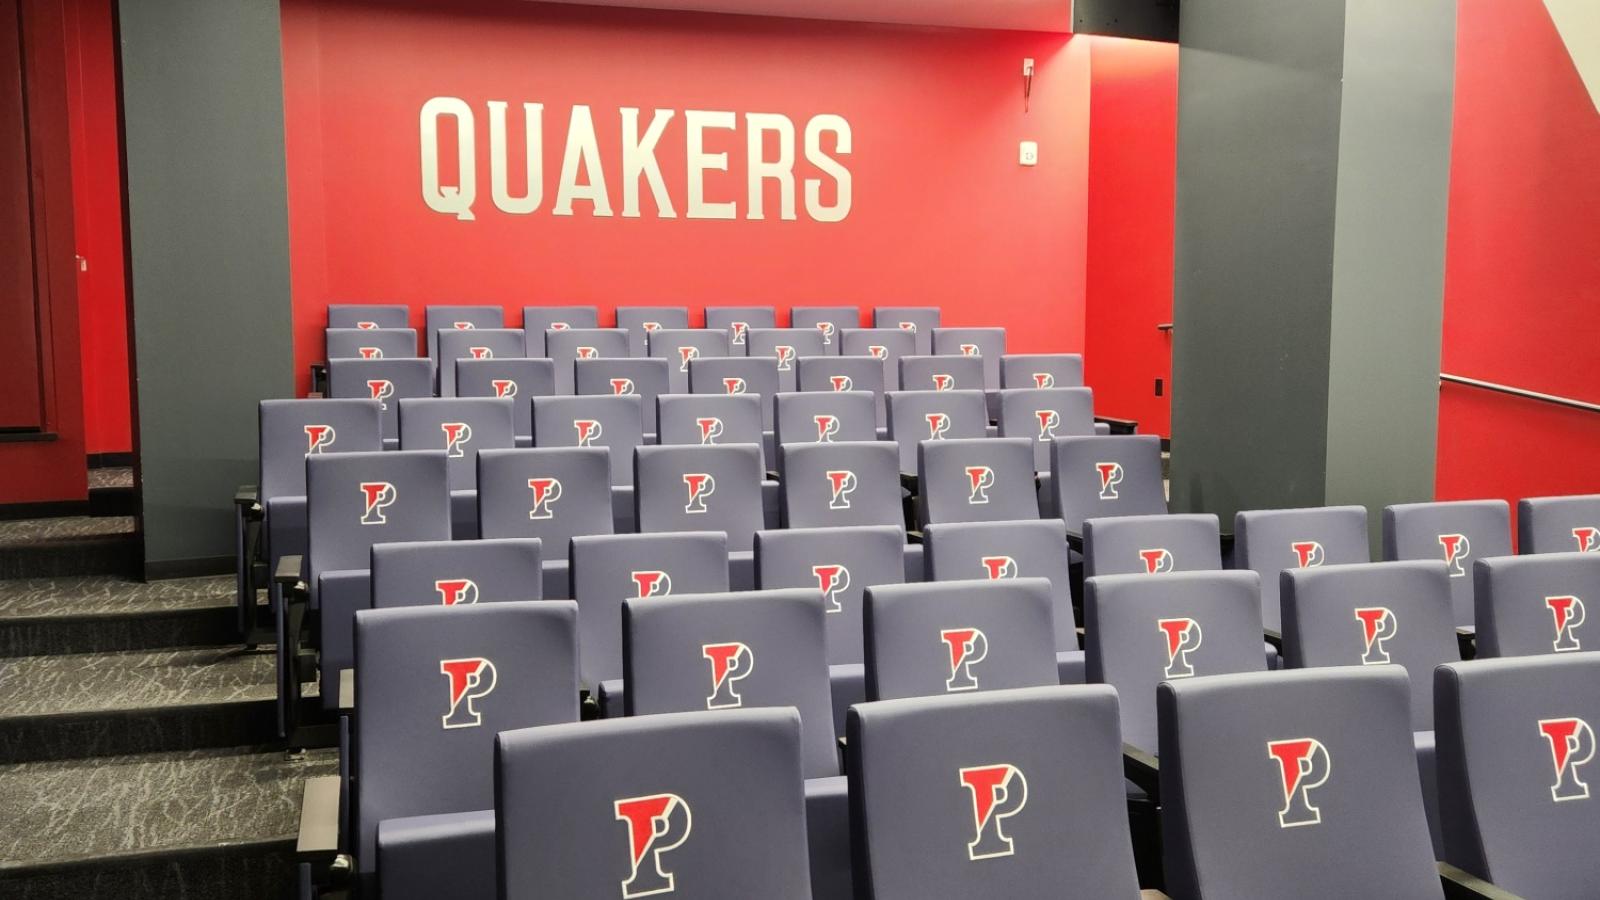 Stadium seating in a small auditorium with Penn logo on chairs 